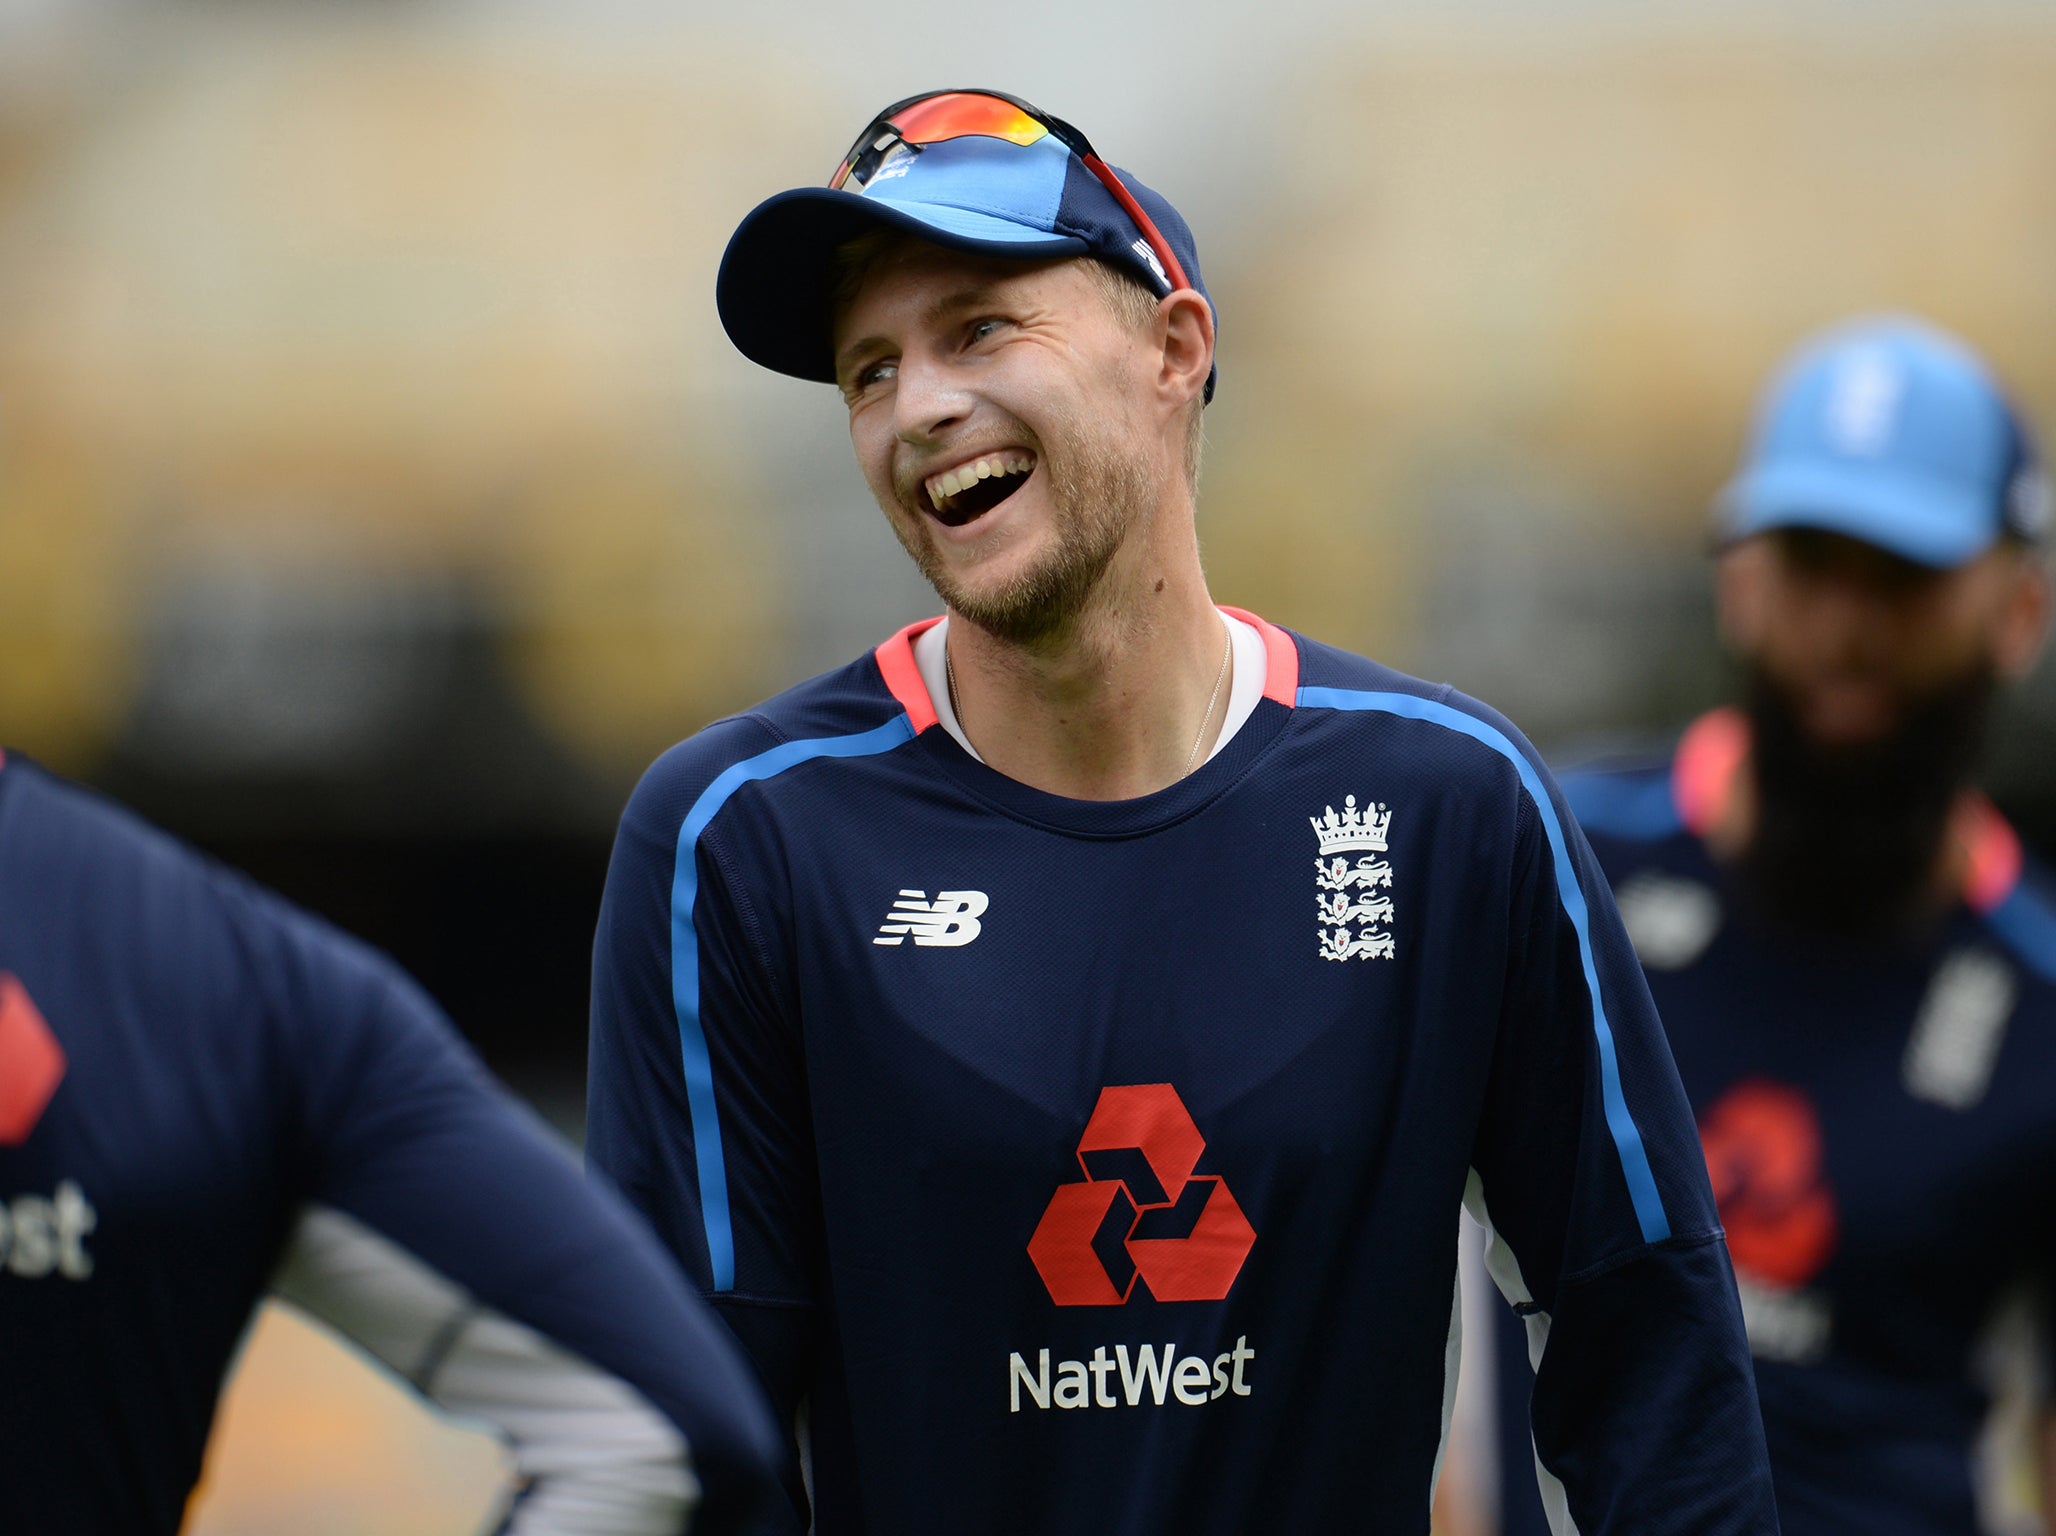 Root is in a confident mood ahead of the Ashes